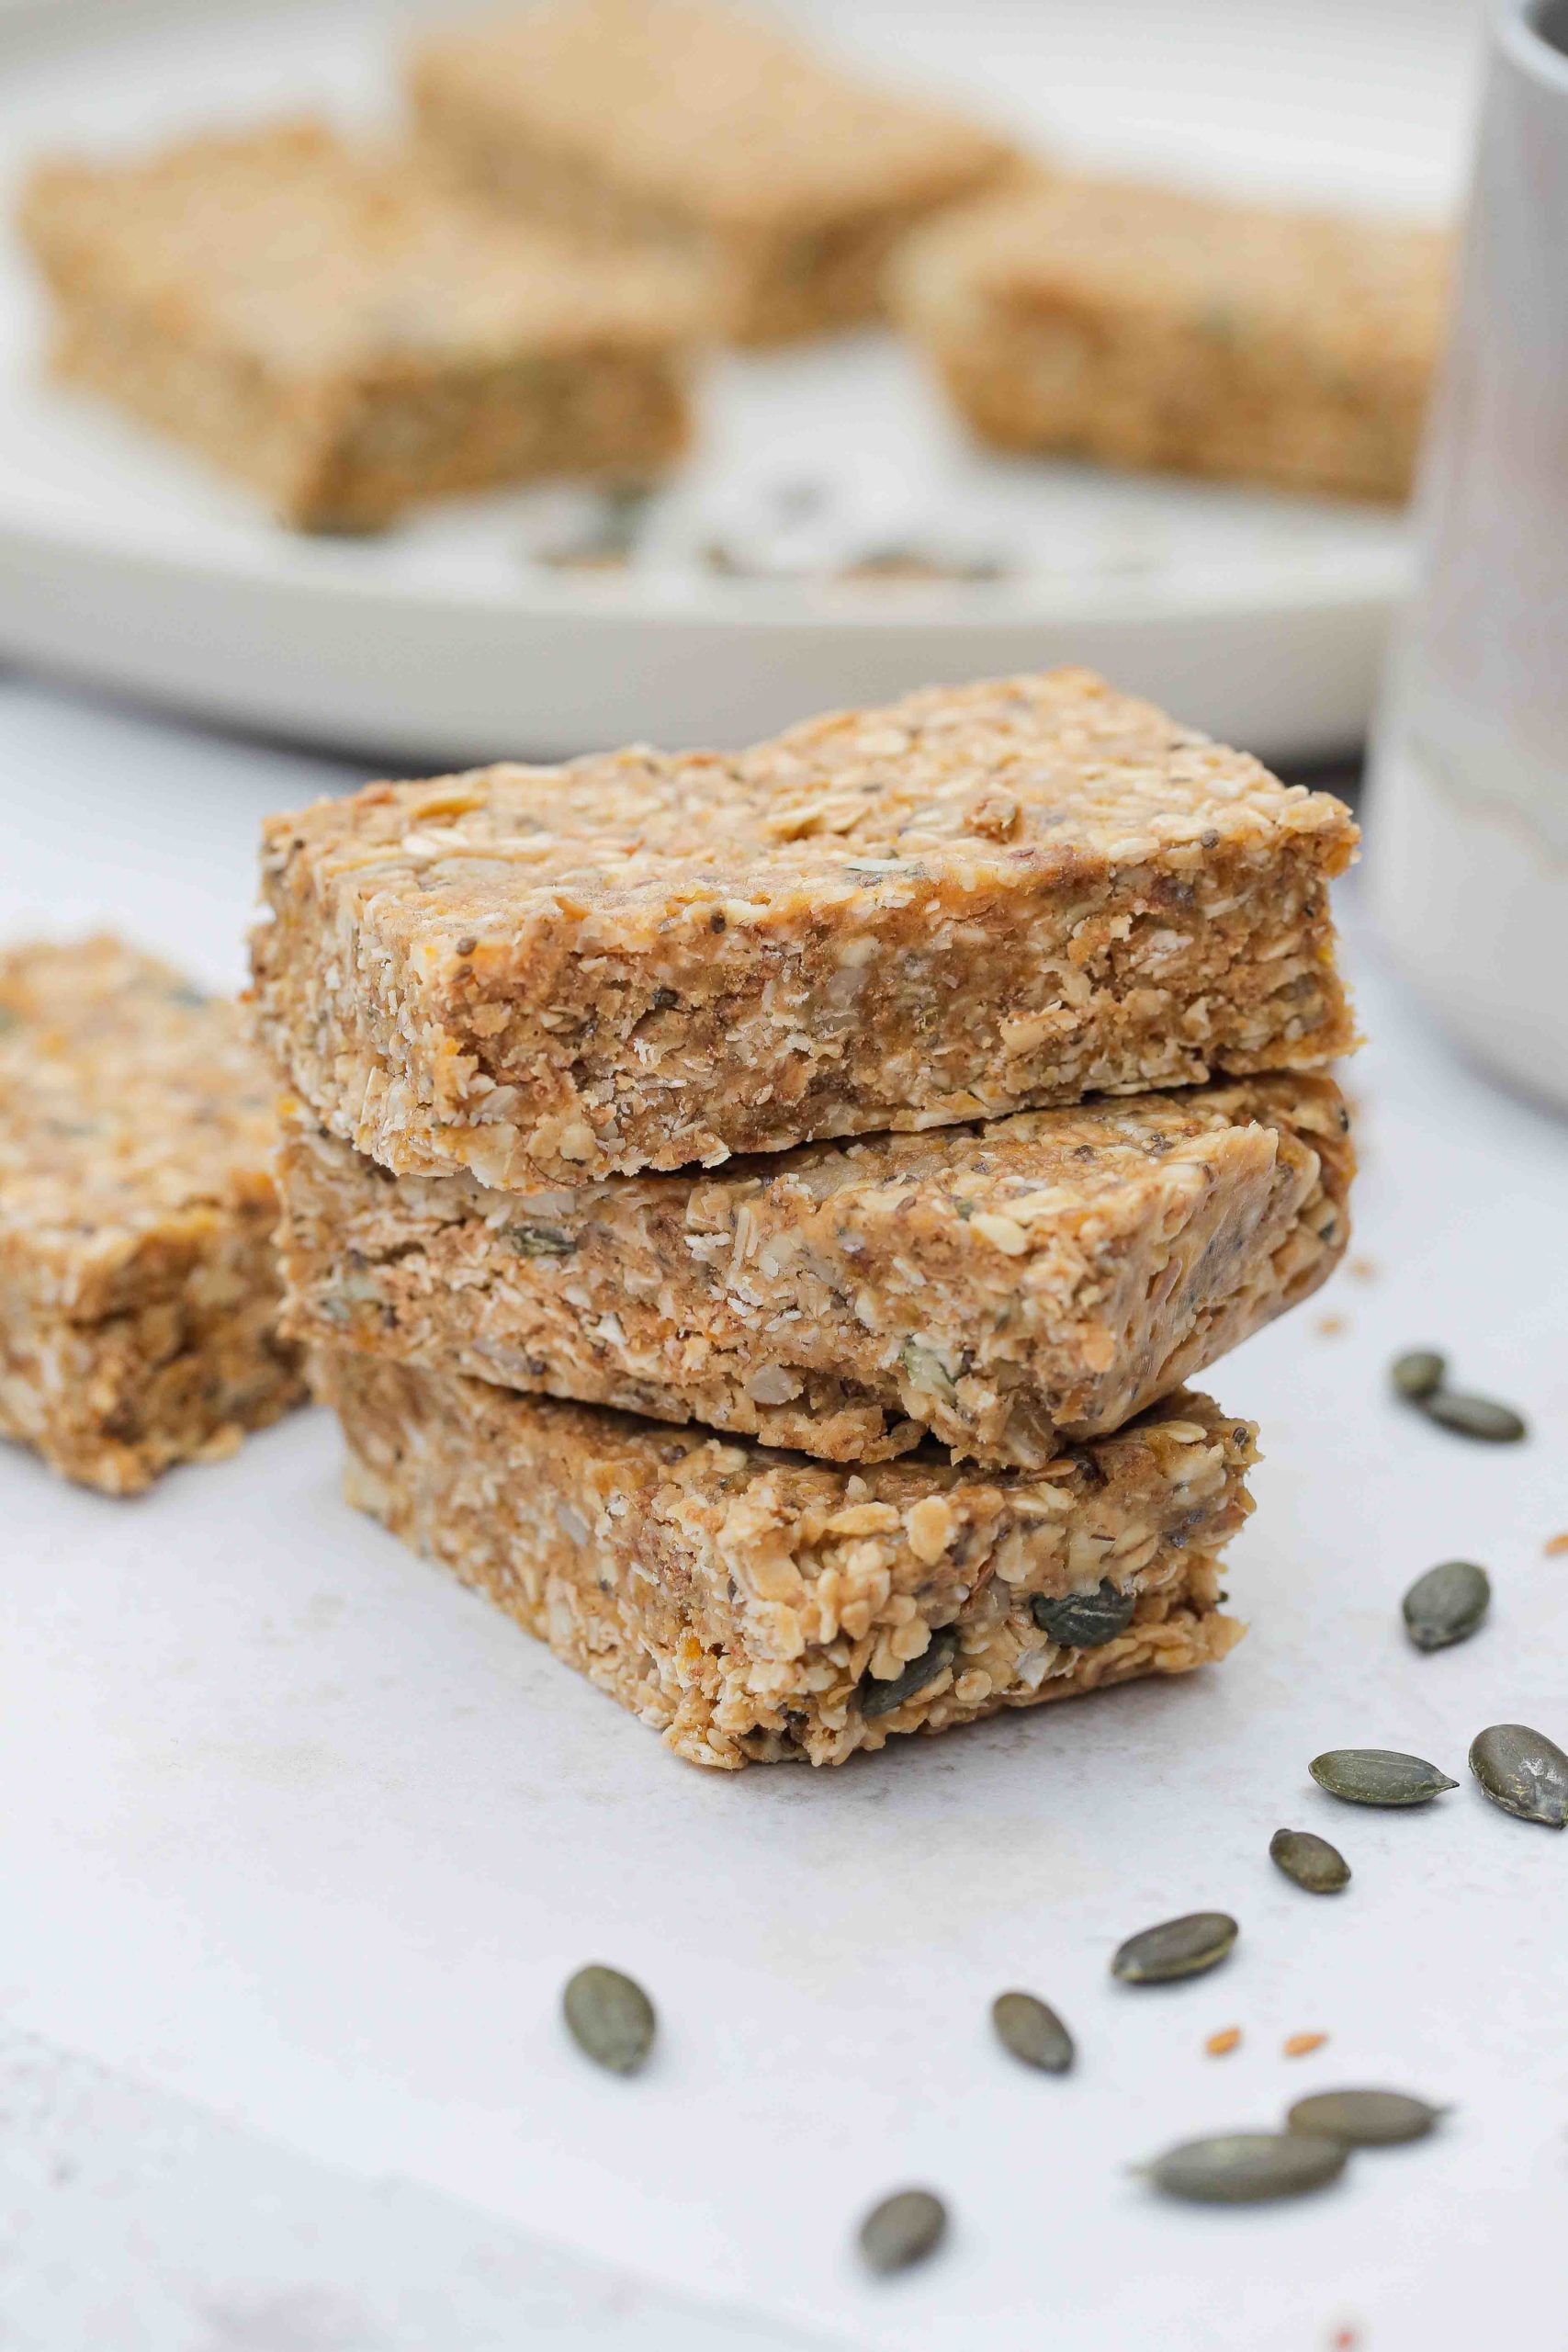 EASY no bake homemade peanut butter oat bars - full of seeds, nuts and dried fruits. Refined sugar free but sweet and chewy and perfect for a quick breakfast or snack! Vegan and gluten free recipe on thecookandhim.com #nobakebars #peanutbutterbars #granolabars